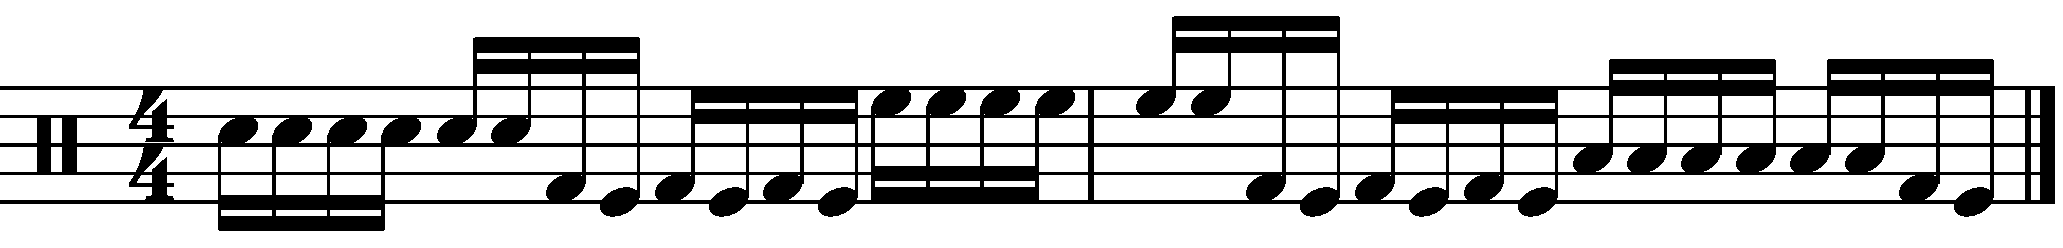 A fill using groups of 4 and double kicks